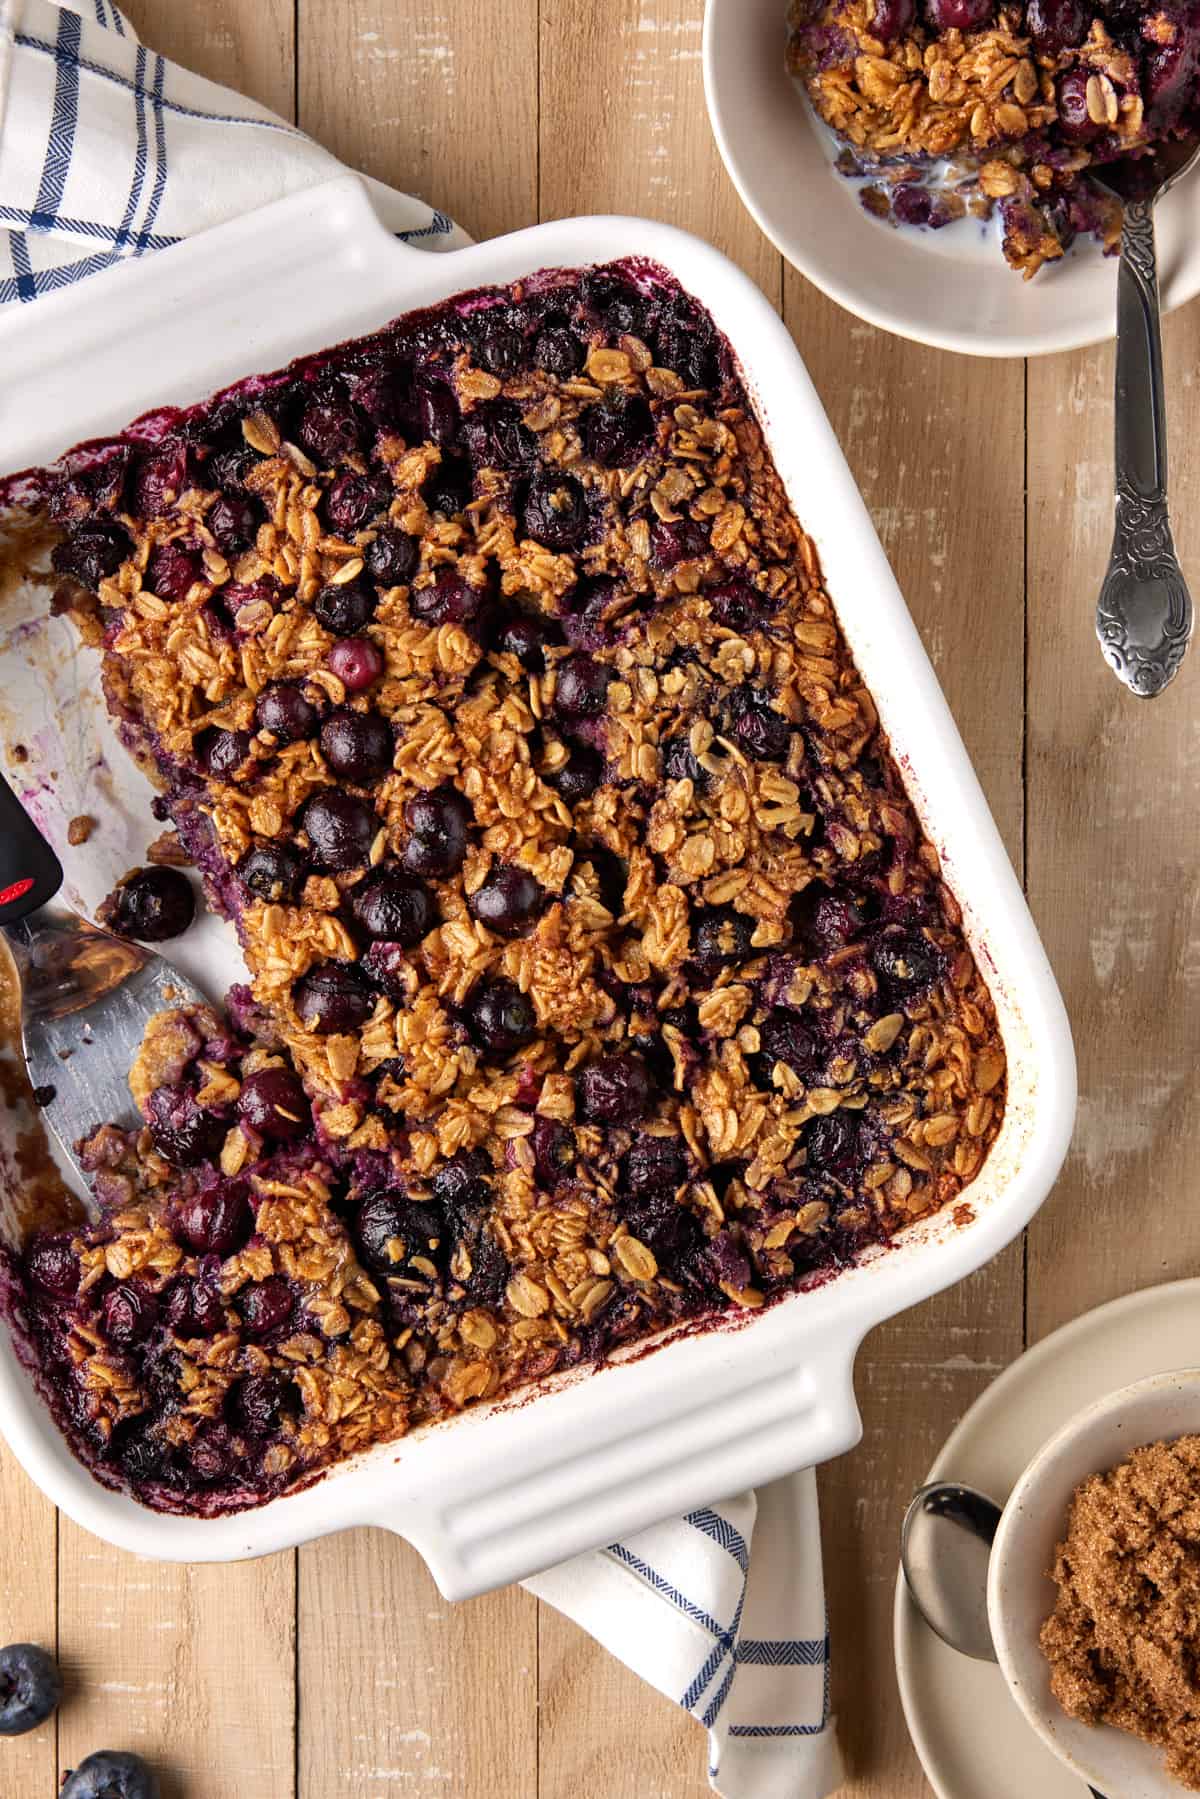 Blueberry baked oatmeal with brown sugar.